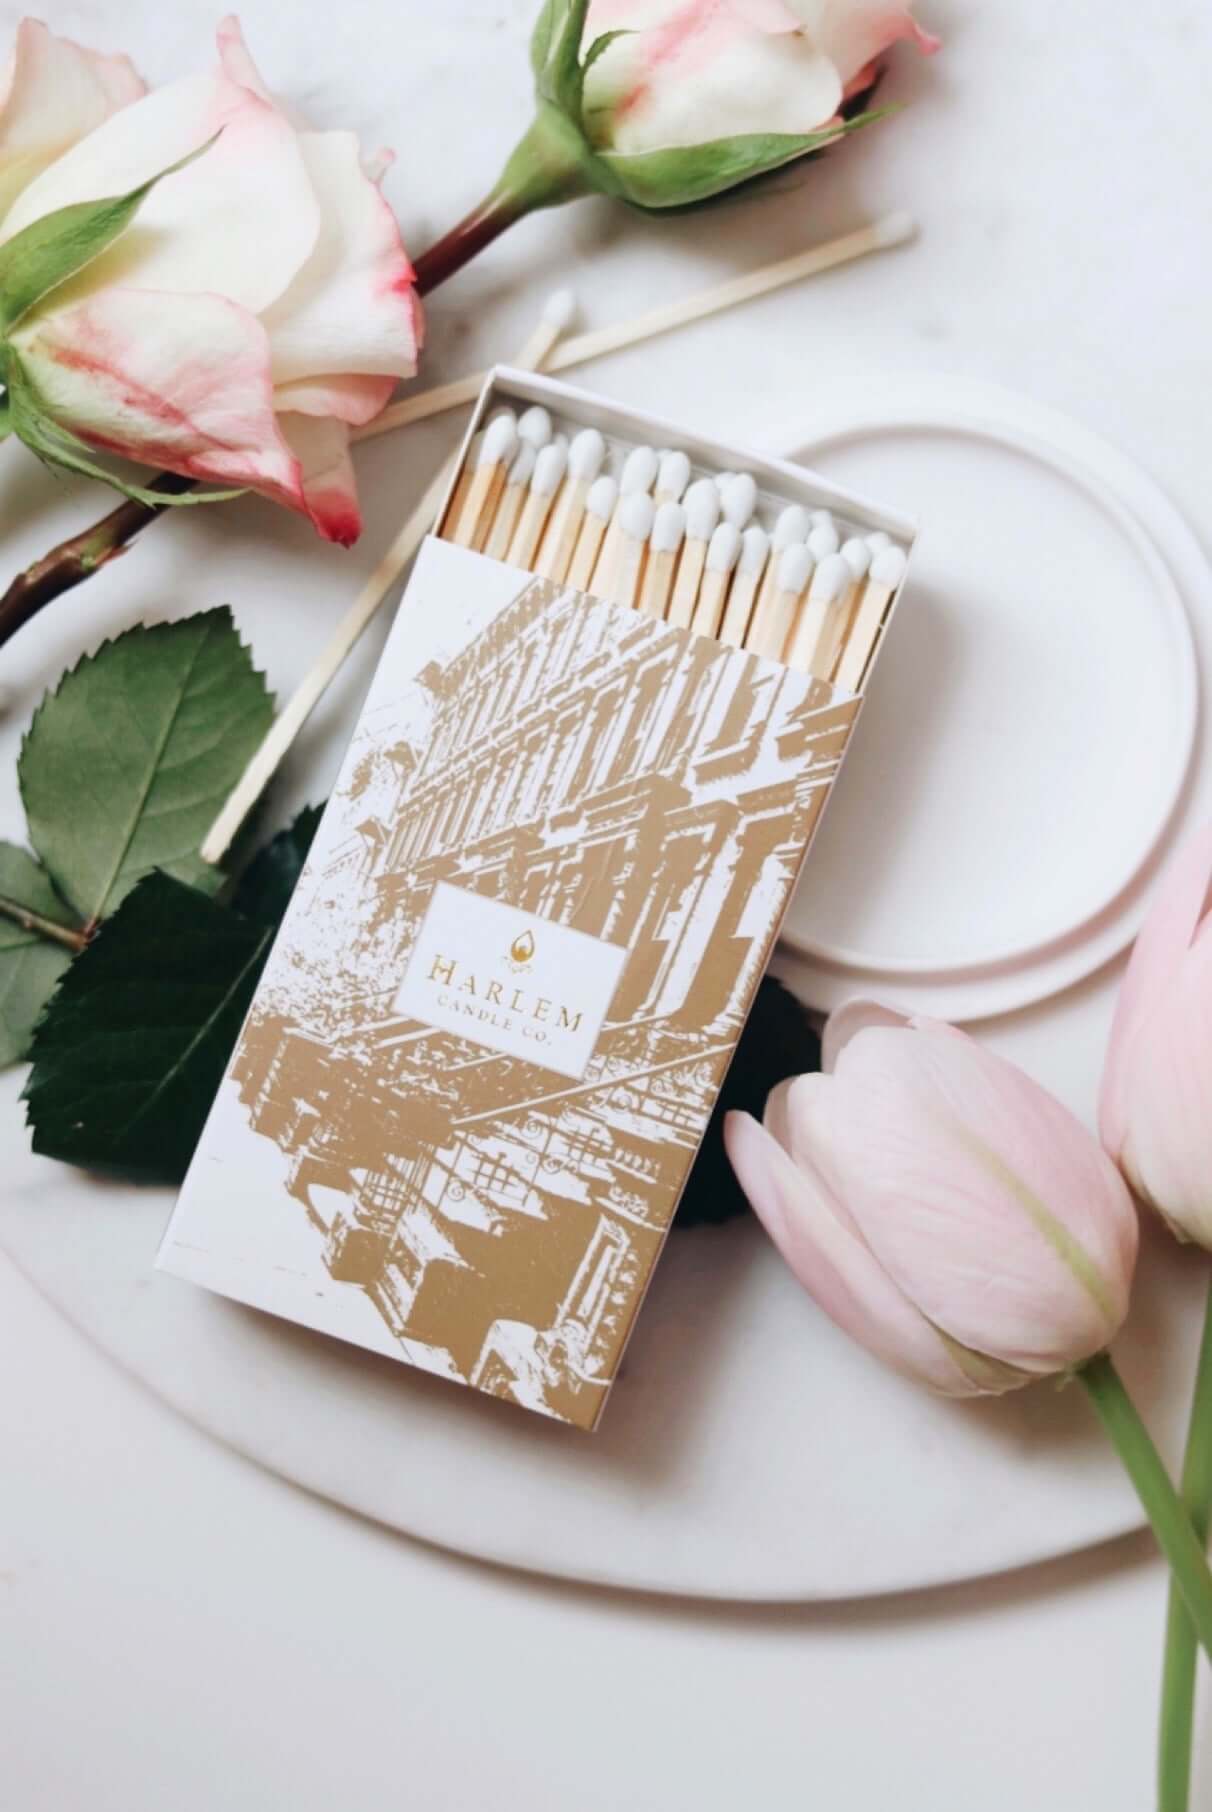 A lifestyle image of our Match Made in Harlem match box opened sitting atop a white plate with flowers surrounding with a romantic atmosphere.